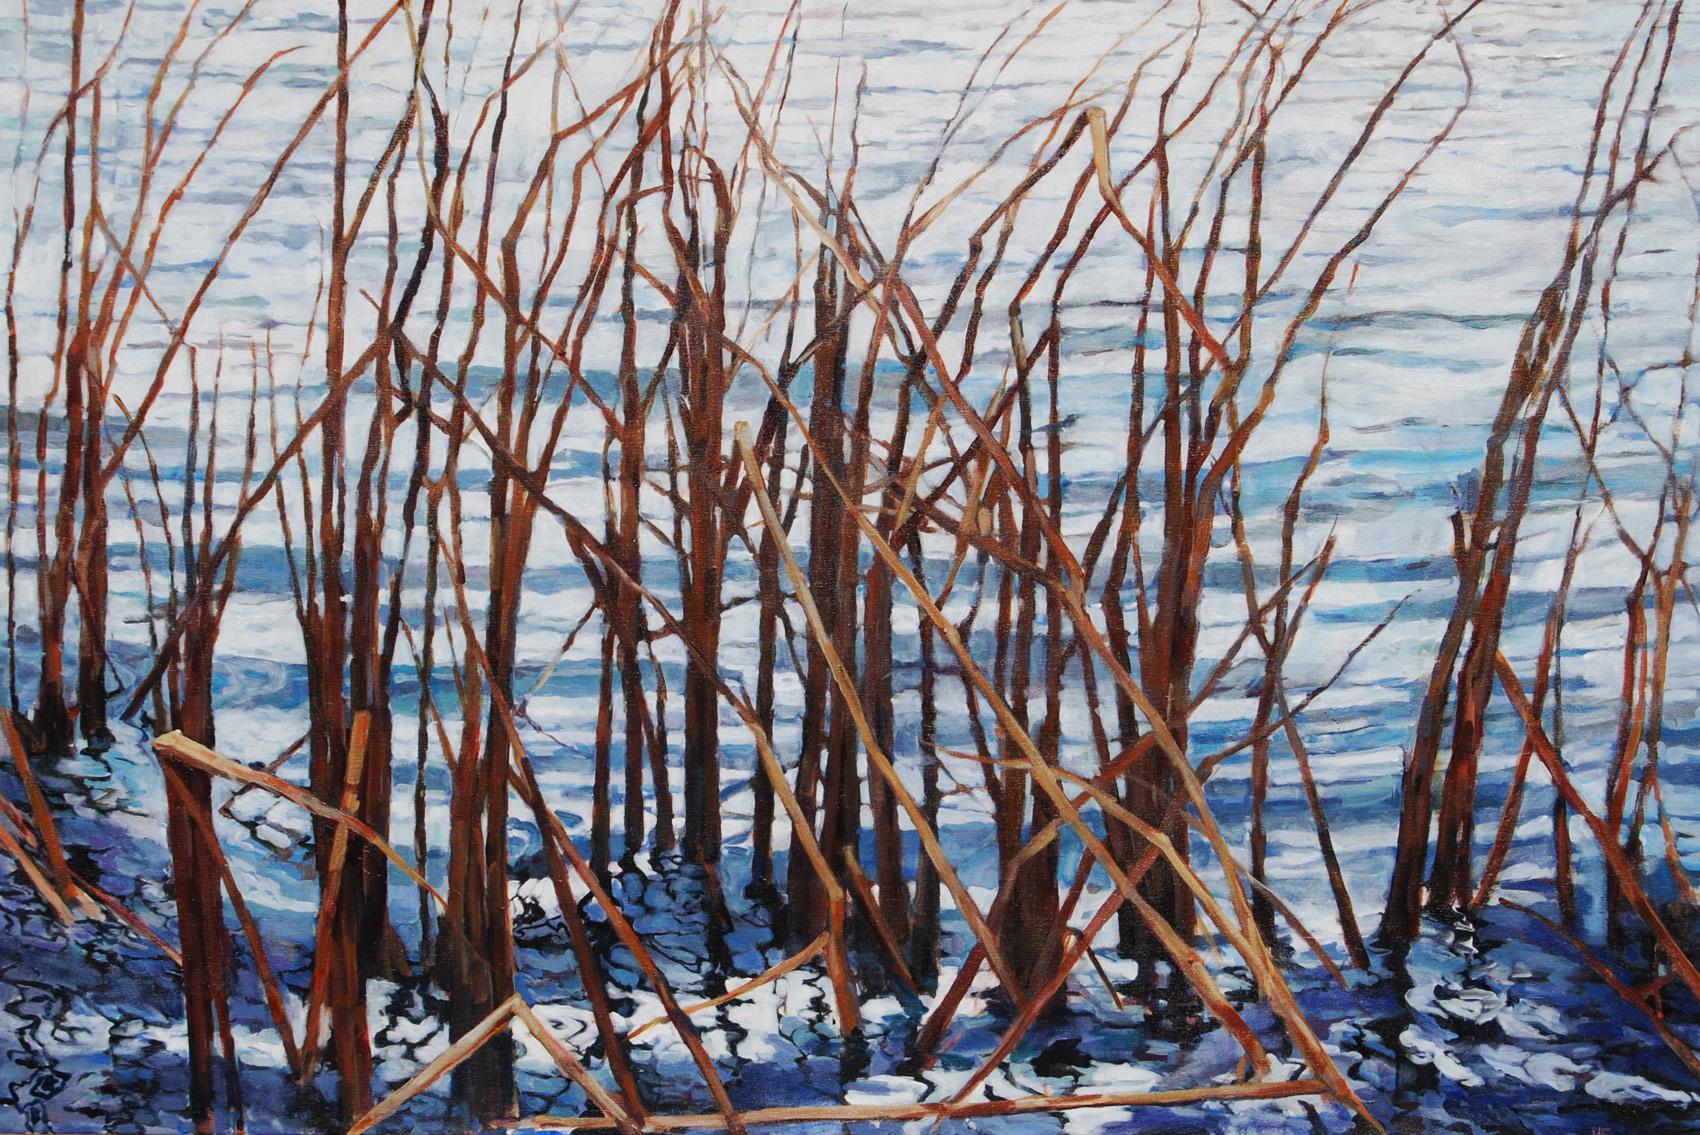 Reeds and Ripples, Original Painting - Art by Heather Foster